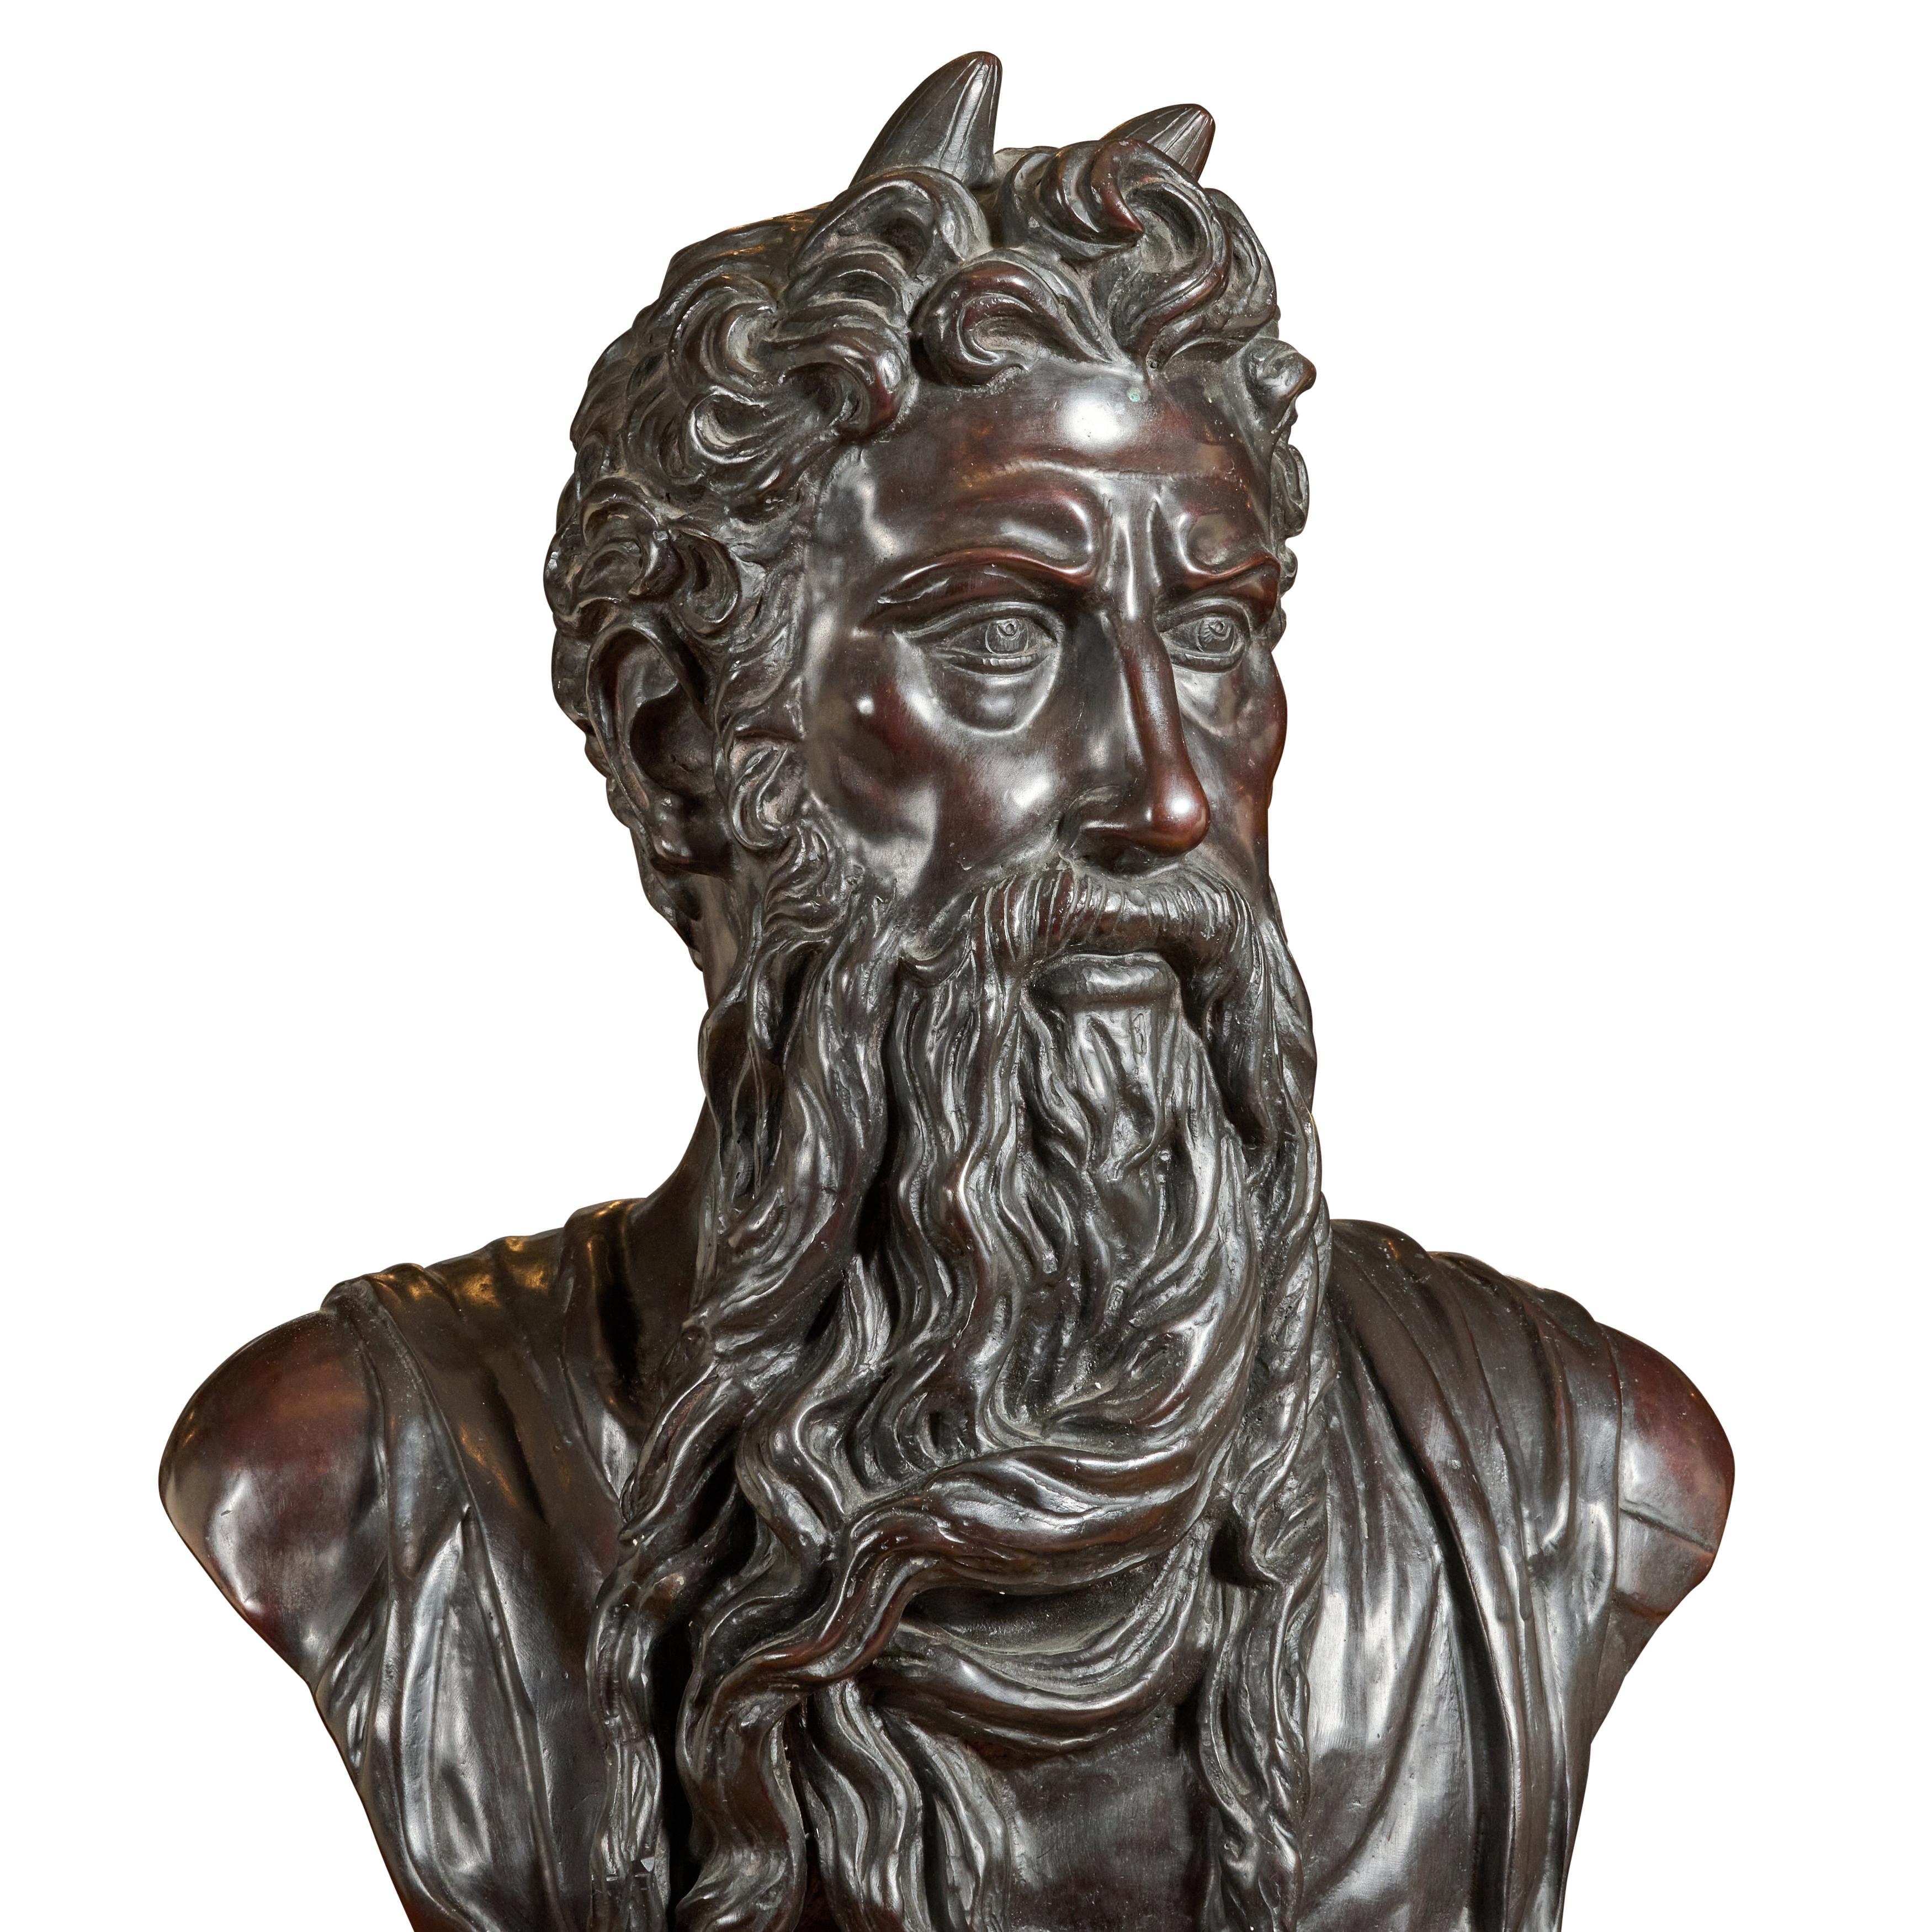 The best bronze bust of Moses. Modeled after Michelangelo's Moses. In credible patina.

